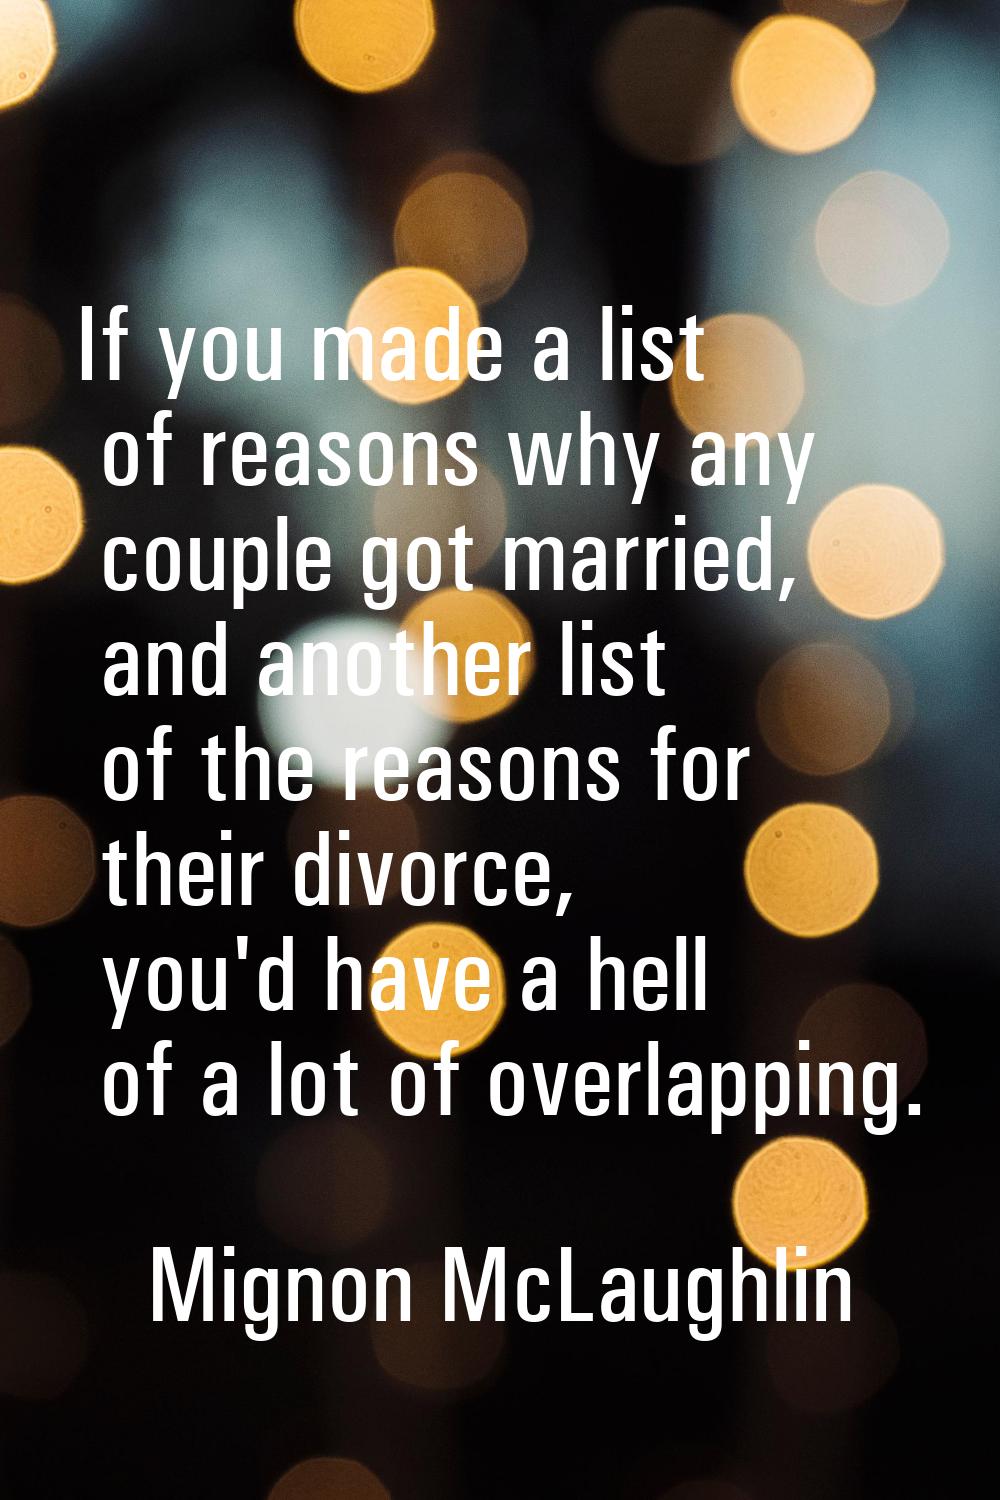 If you made a list of reasons why any couple got married, and another list of the reasons for their